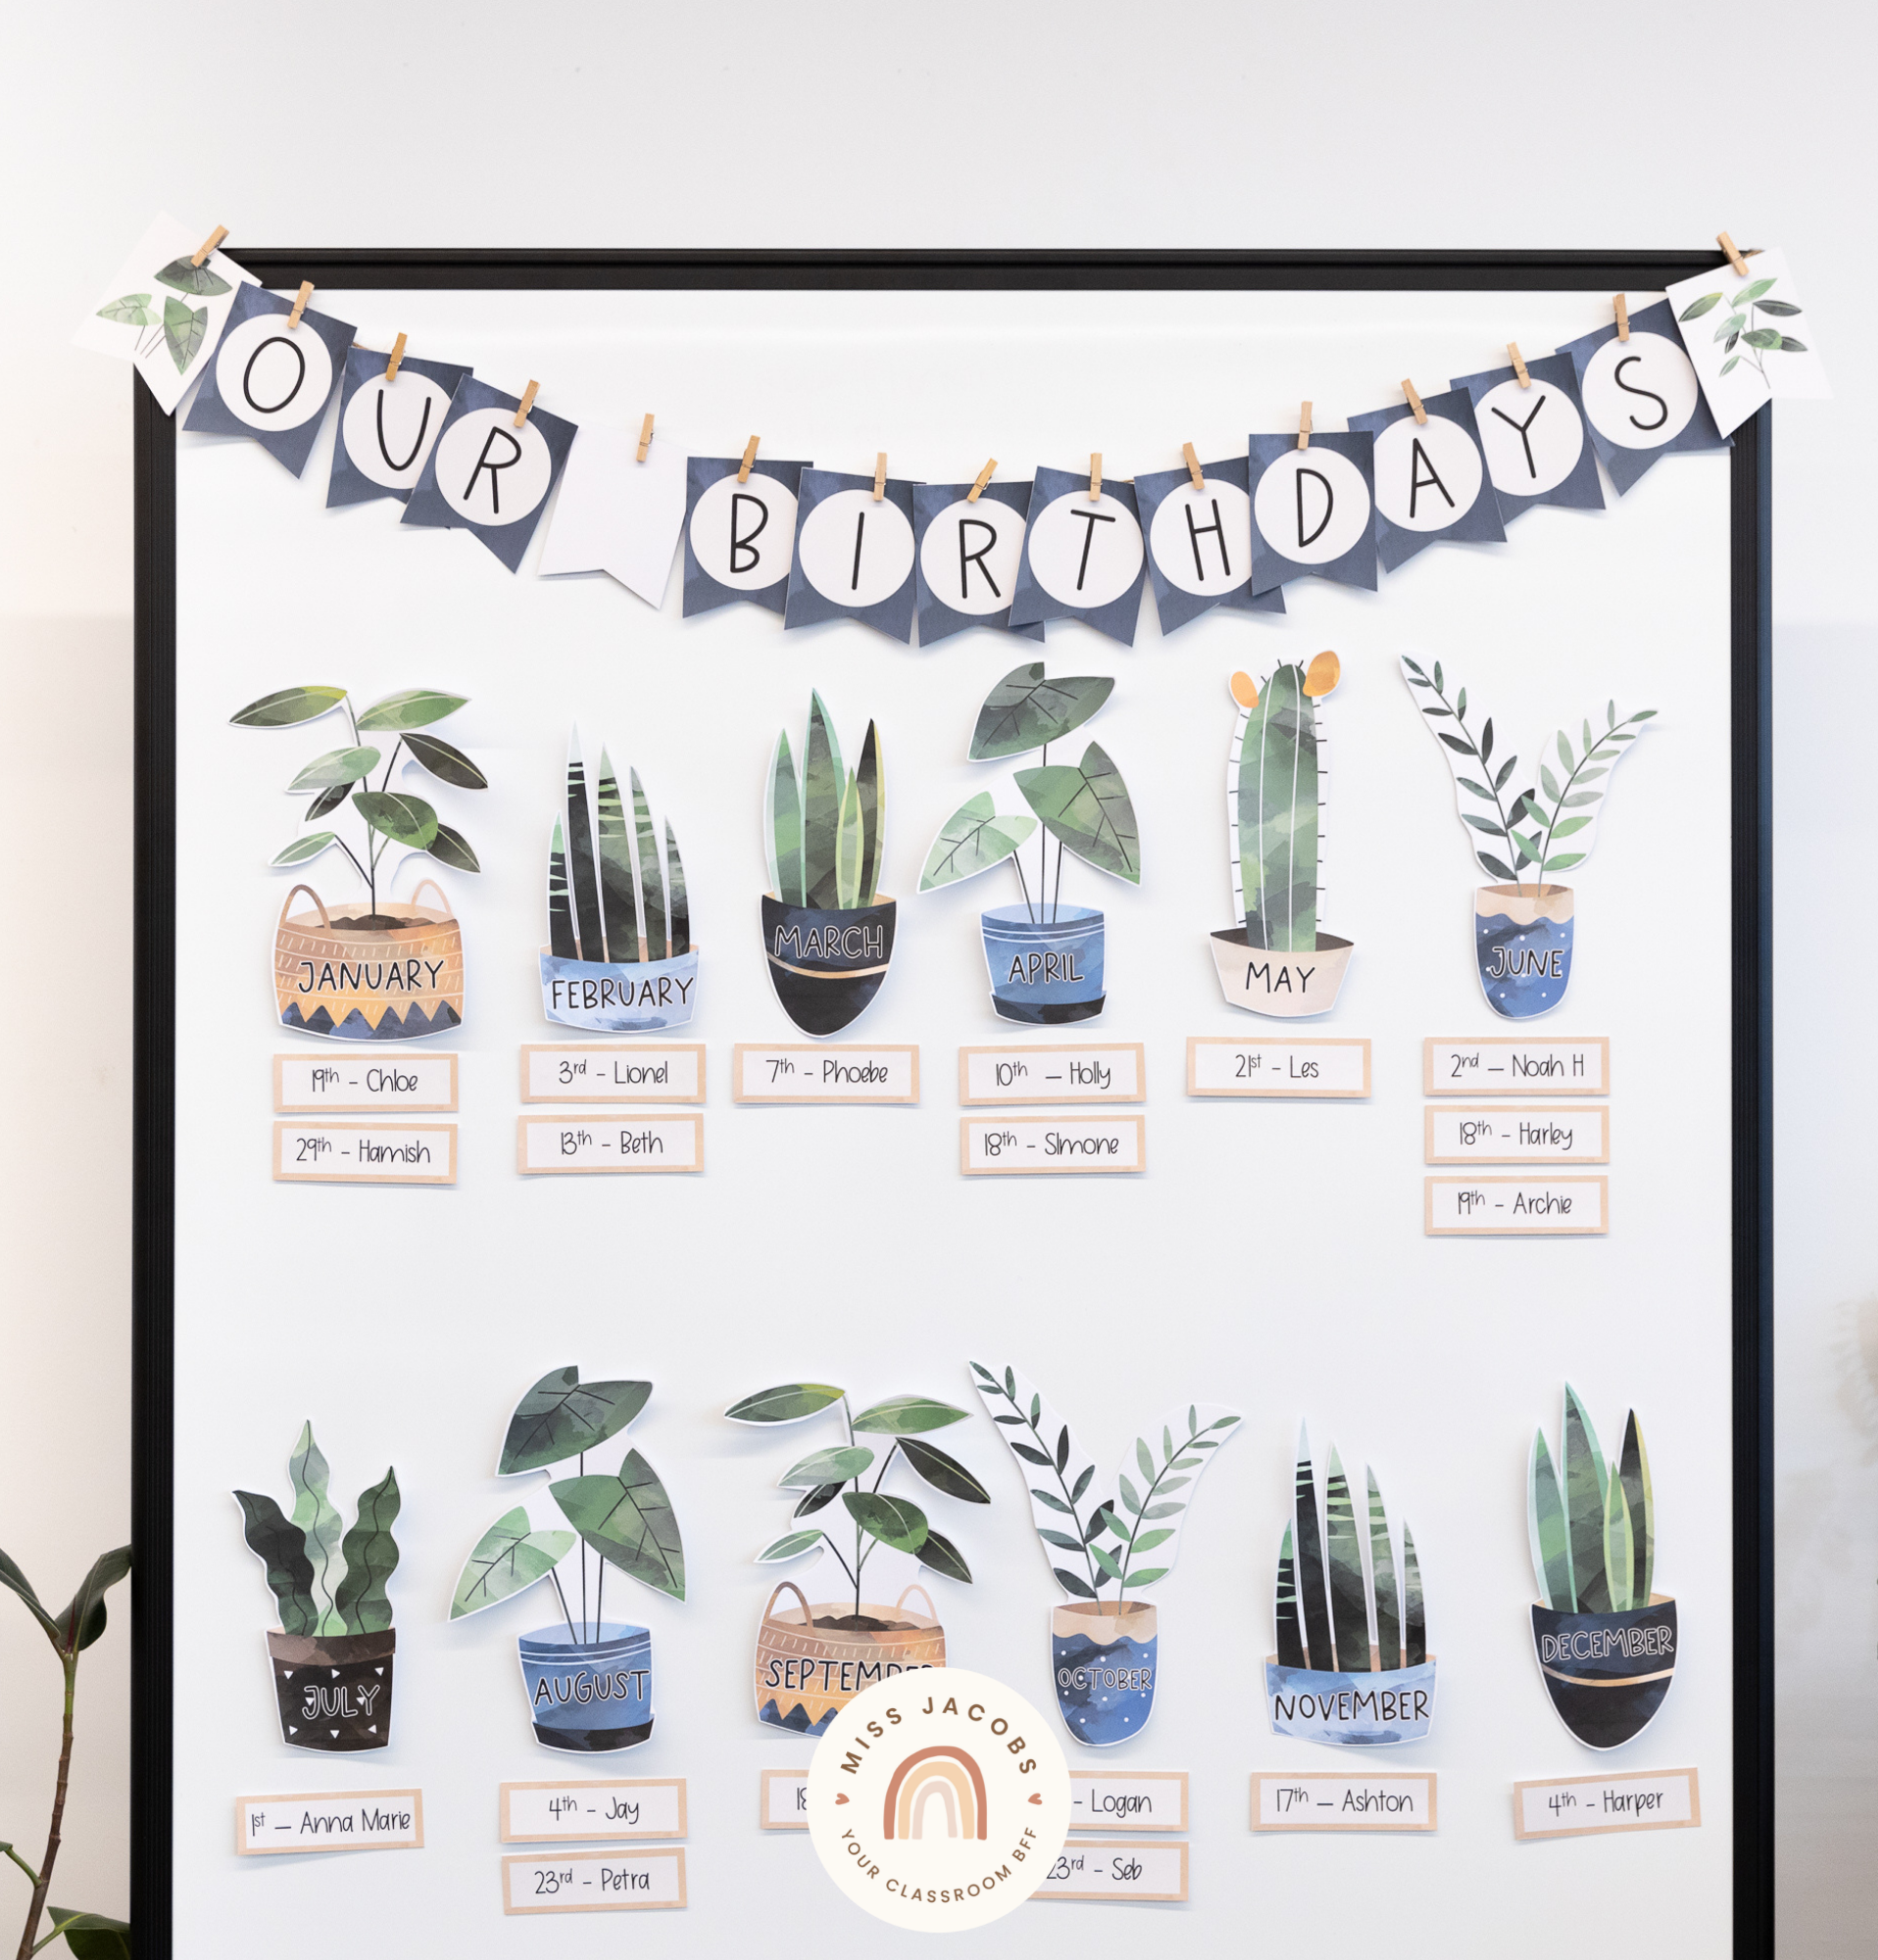 Two images show the ‘Our Birthdays’ display. The months of the year are depicted on illustrations of plants, and underneath students’ names and birthdays are displayed on rectangular labels. The color palette includes earthy tones and beautiful blues.